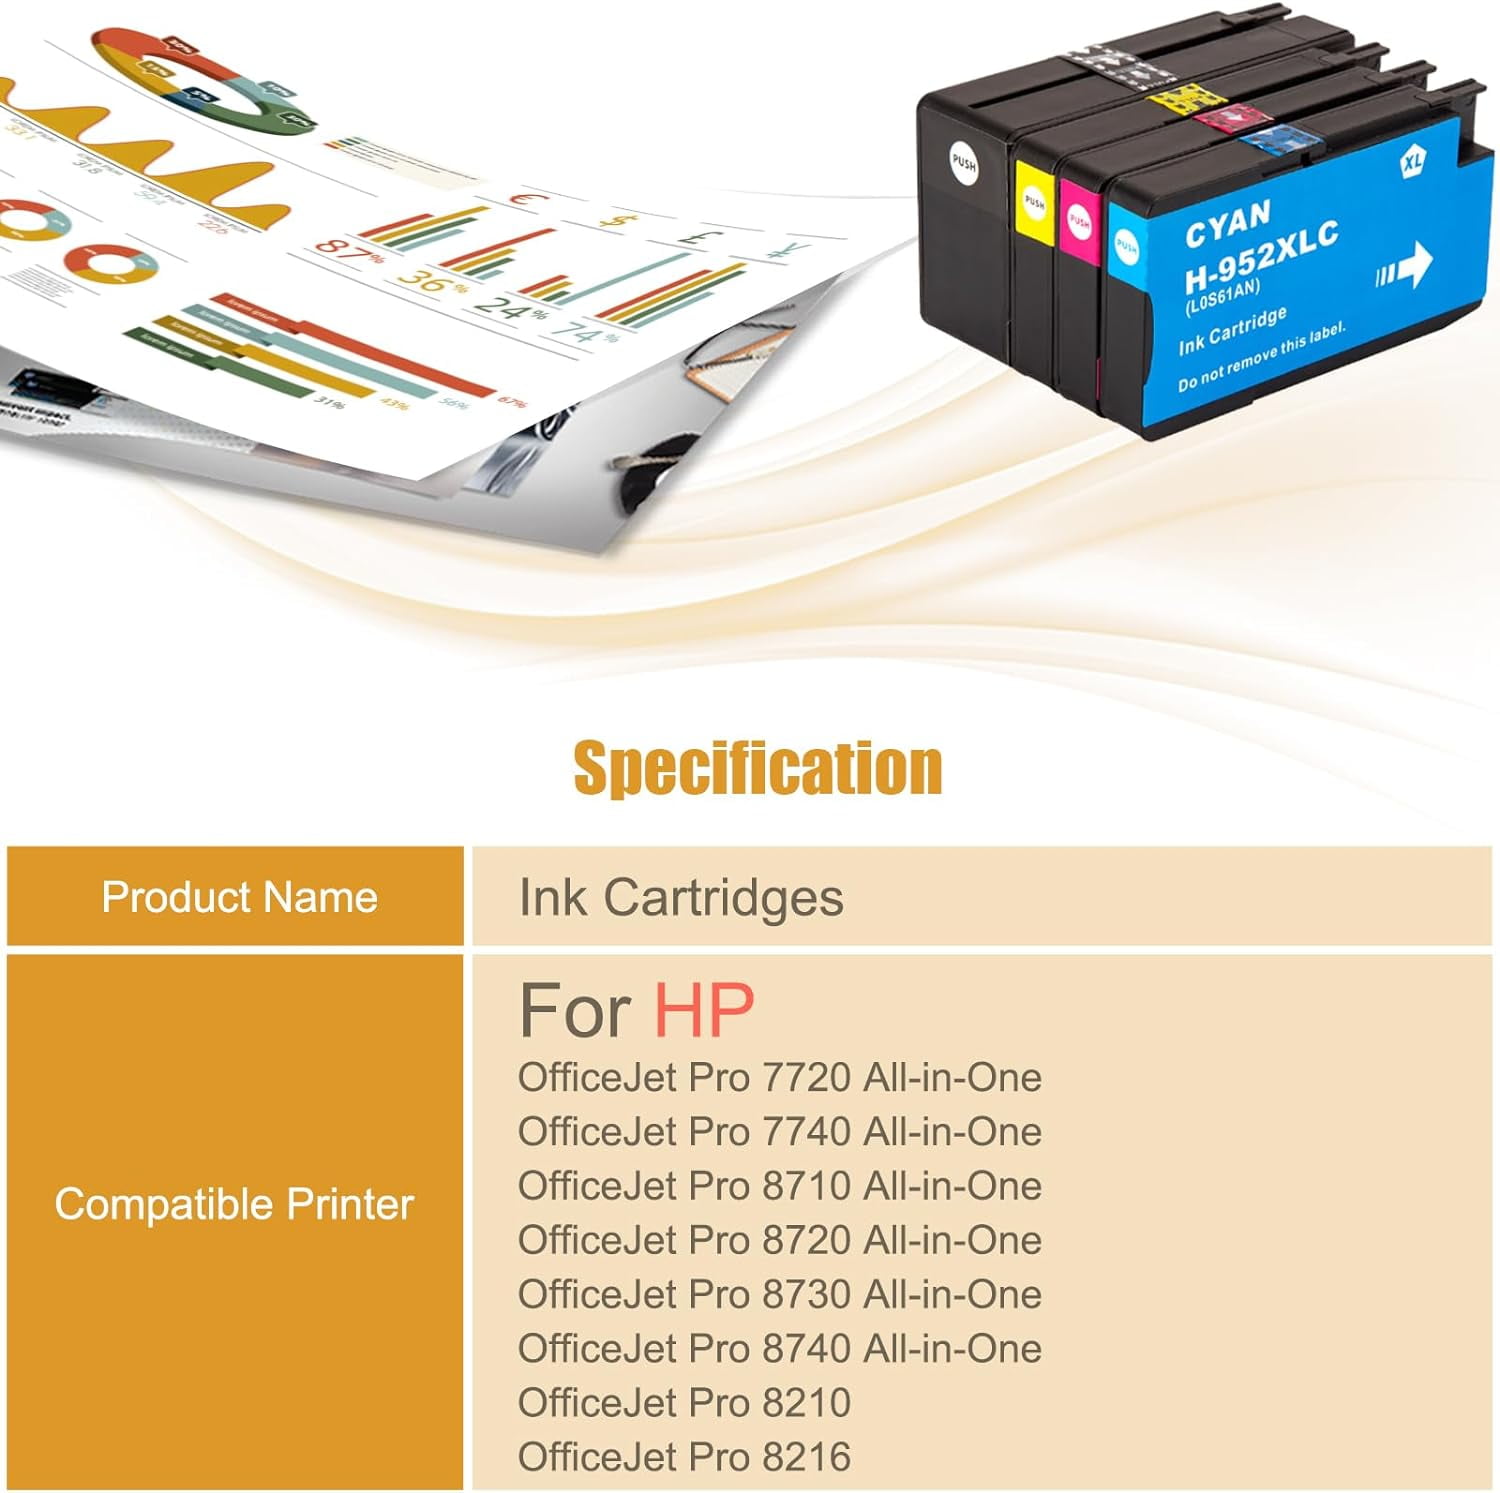 Refillable Ink Cartridge With ARC Chip For HP OfficeJet Pro 7720 7740 8210  8710